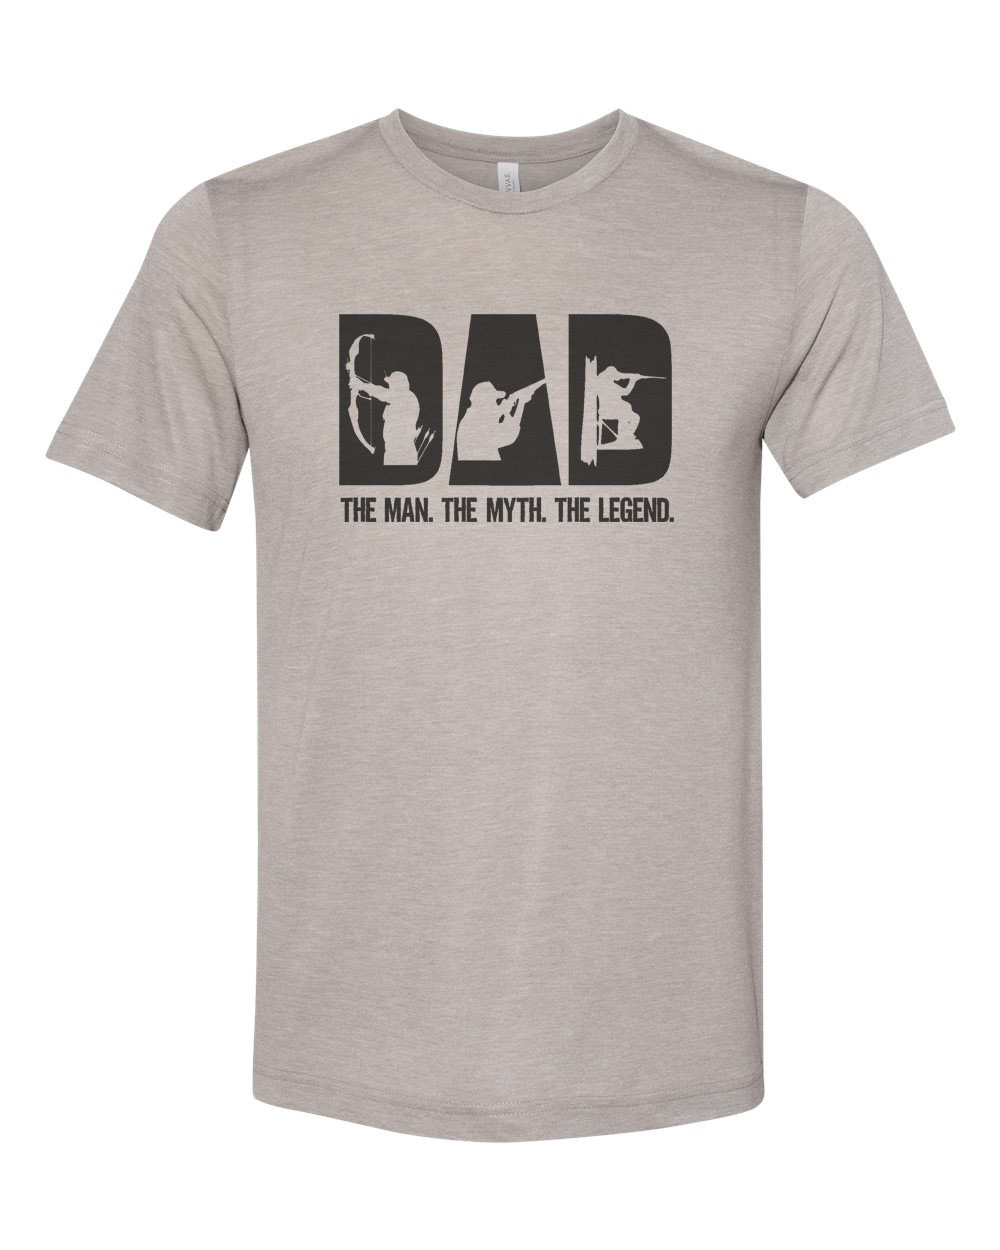 "Dad Shirt, Dad The Man The Myth The Legend, Dad Hunting Shirt, Hunting T-shirt, Dad's Birthday, Father's Day Gift, Hunting Apparel, Hunting, SMALL, Heather Stone" - image 1 of 1